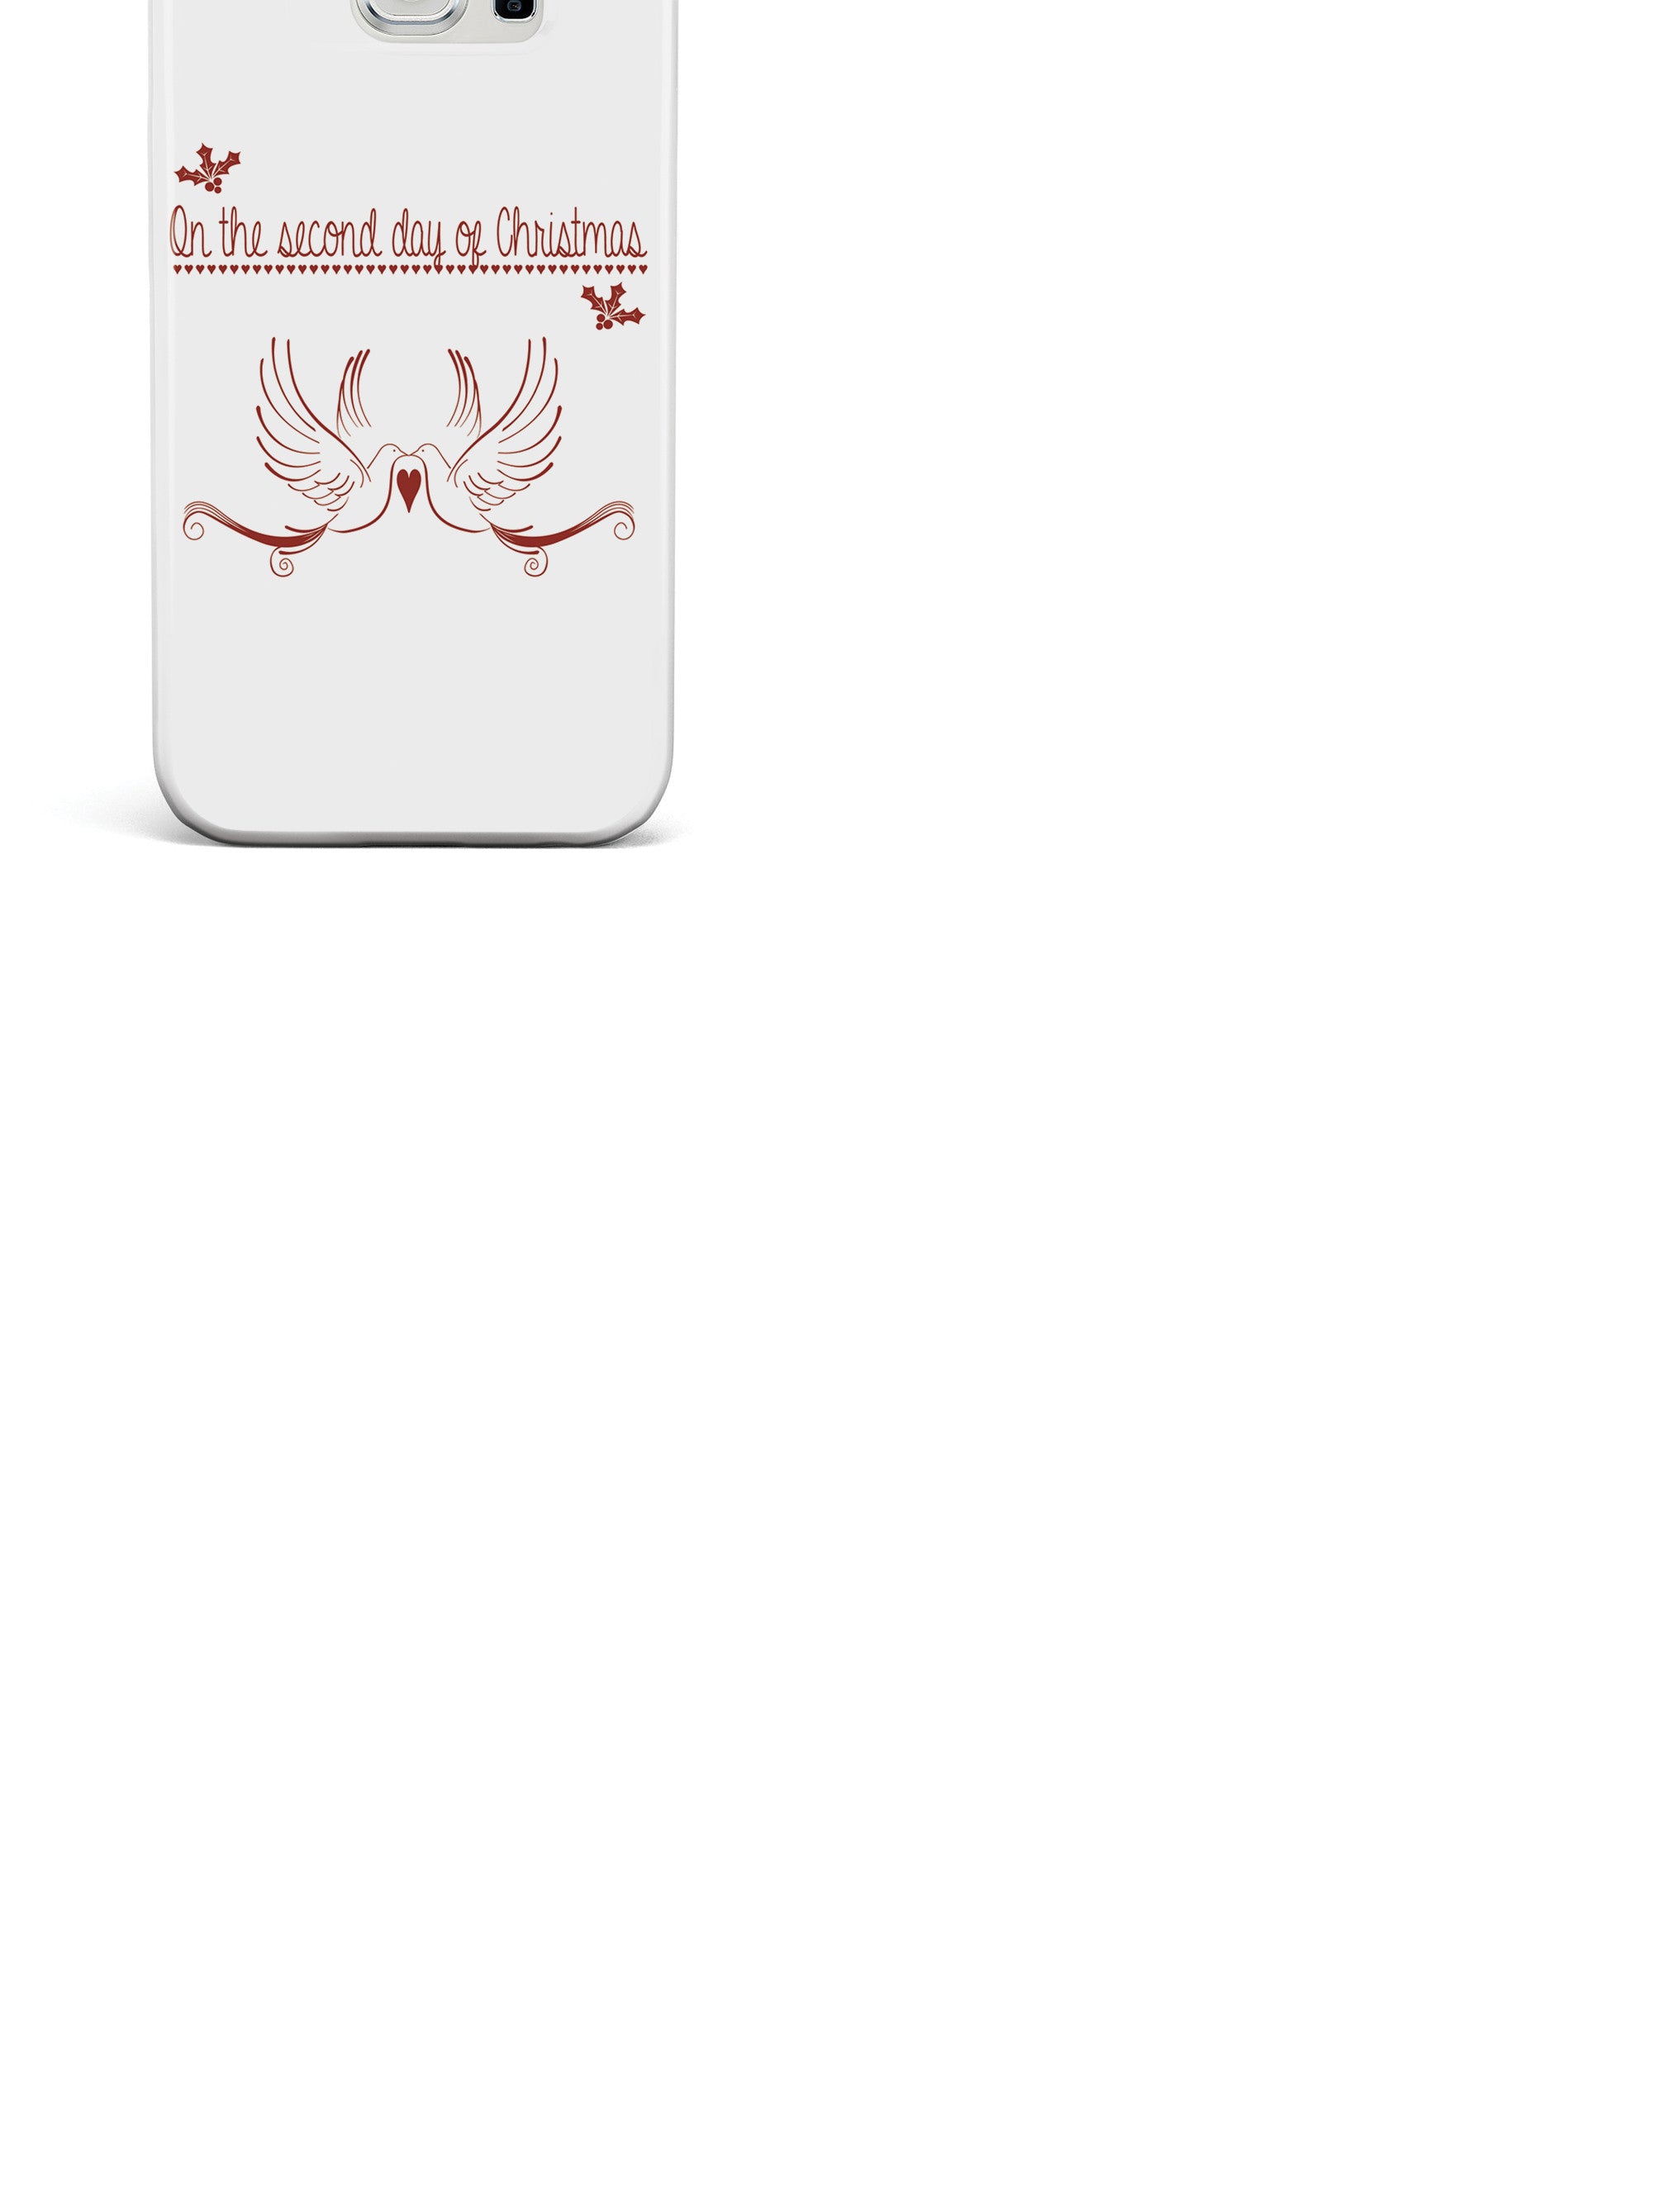 On the Second Day of Christmas - Two Turtle Doves Case